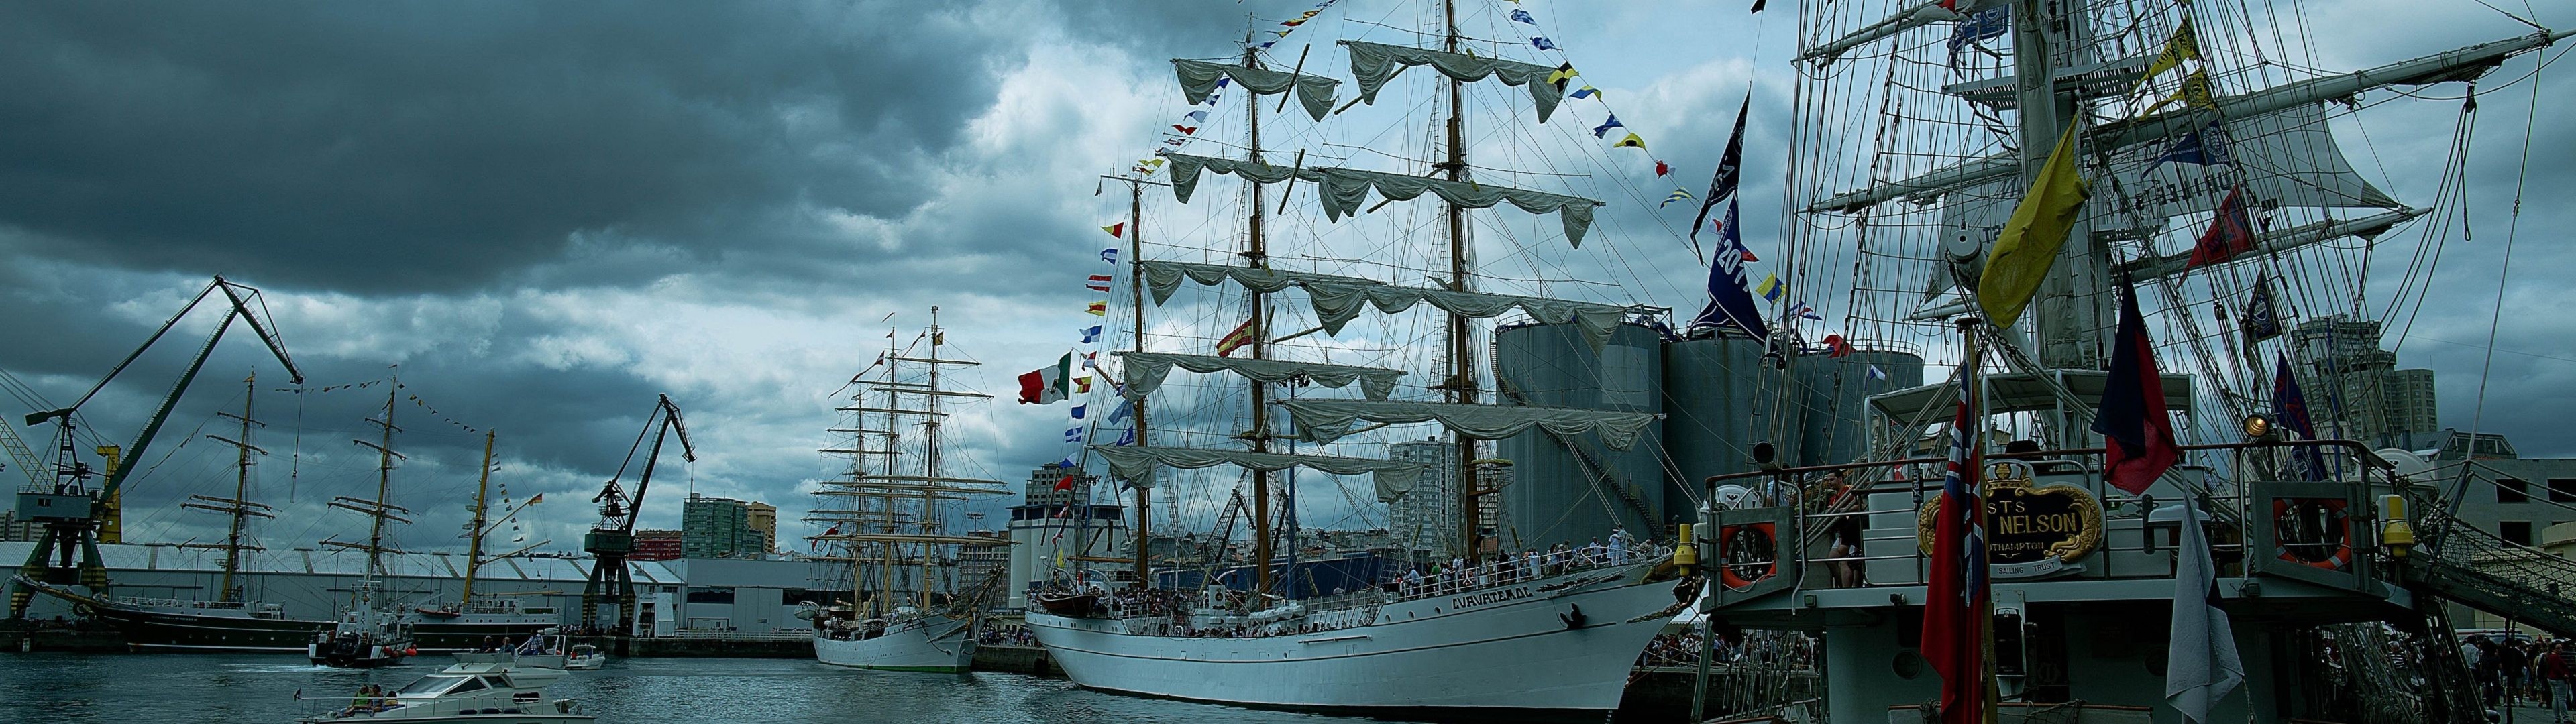 Windjammer: Vessels powered by the wind, Dock, Shipyard. 3840x1080 Dual Screen Background.